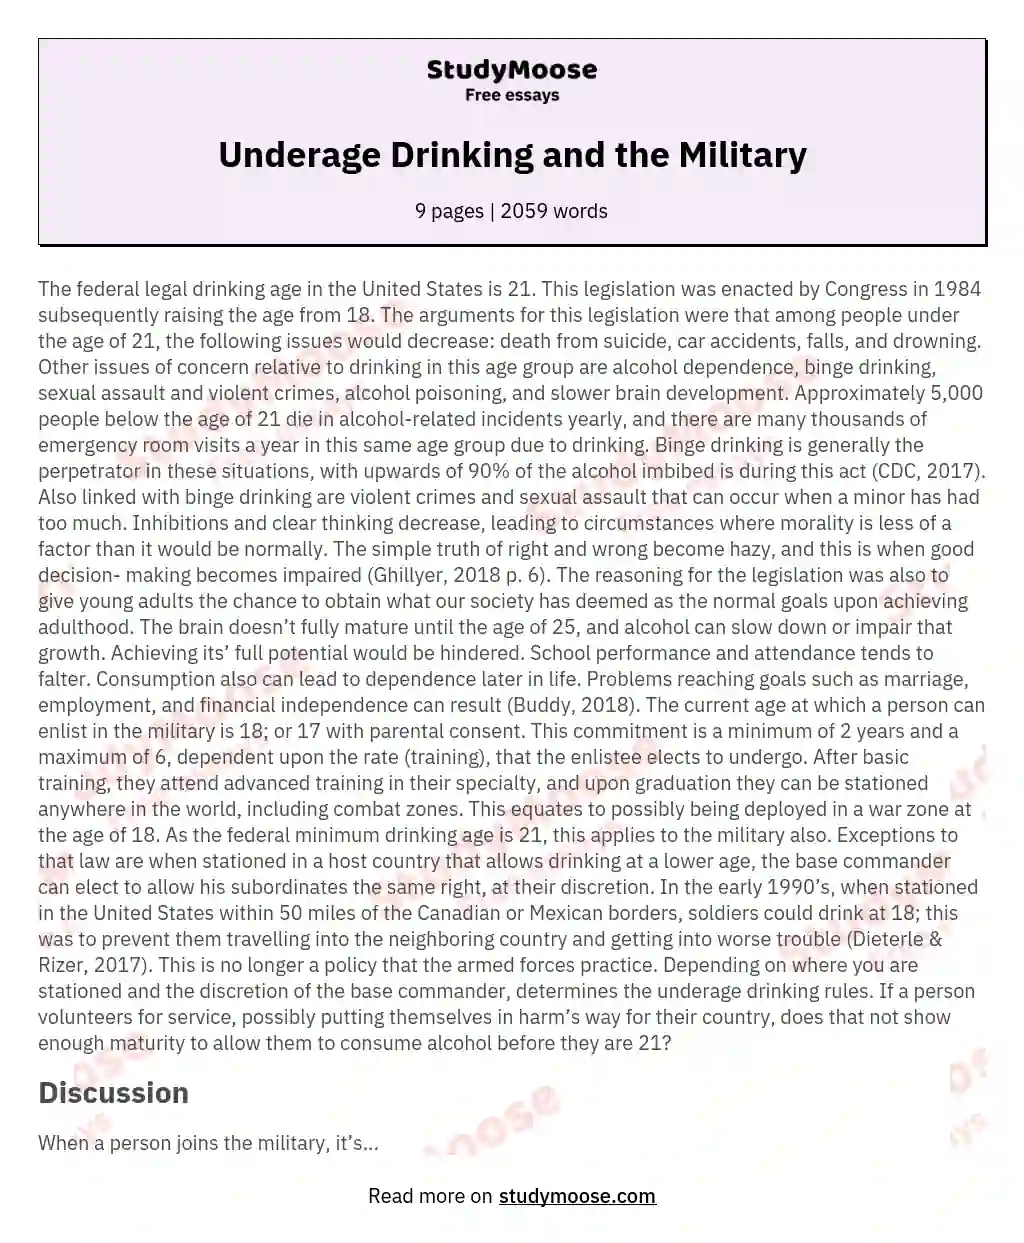 Underage Drinking and the Military